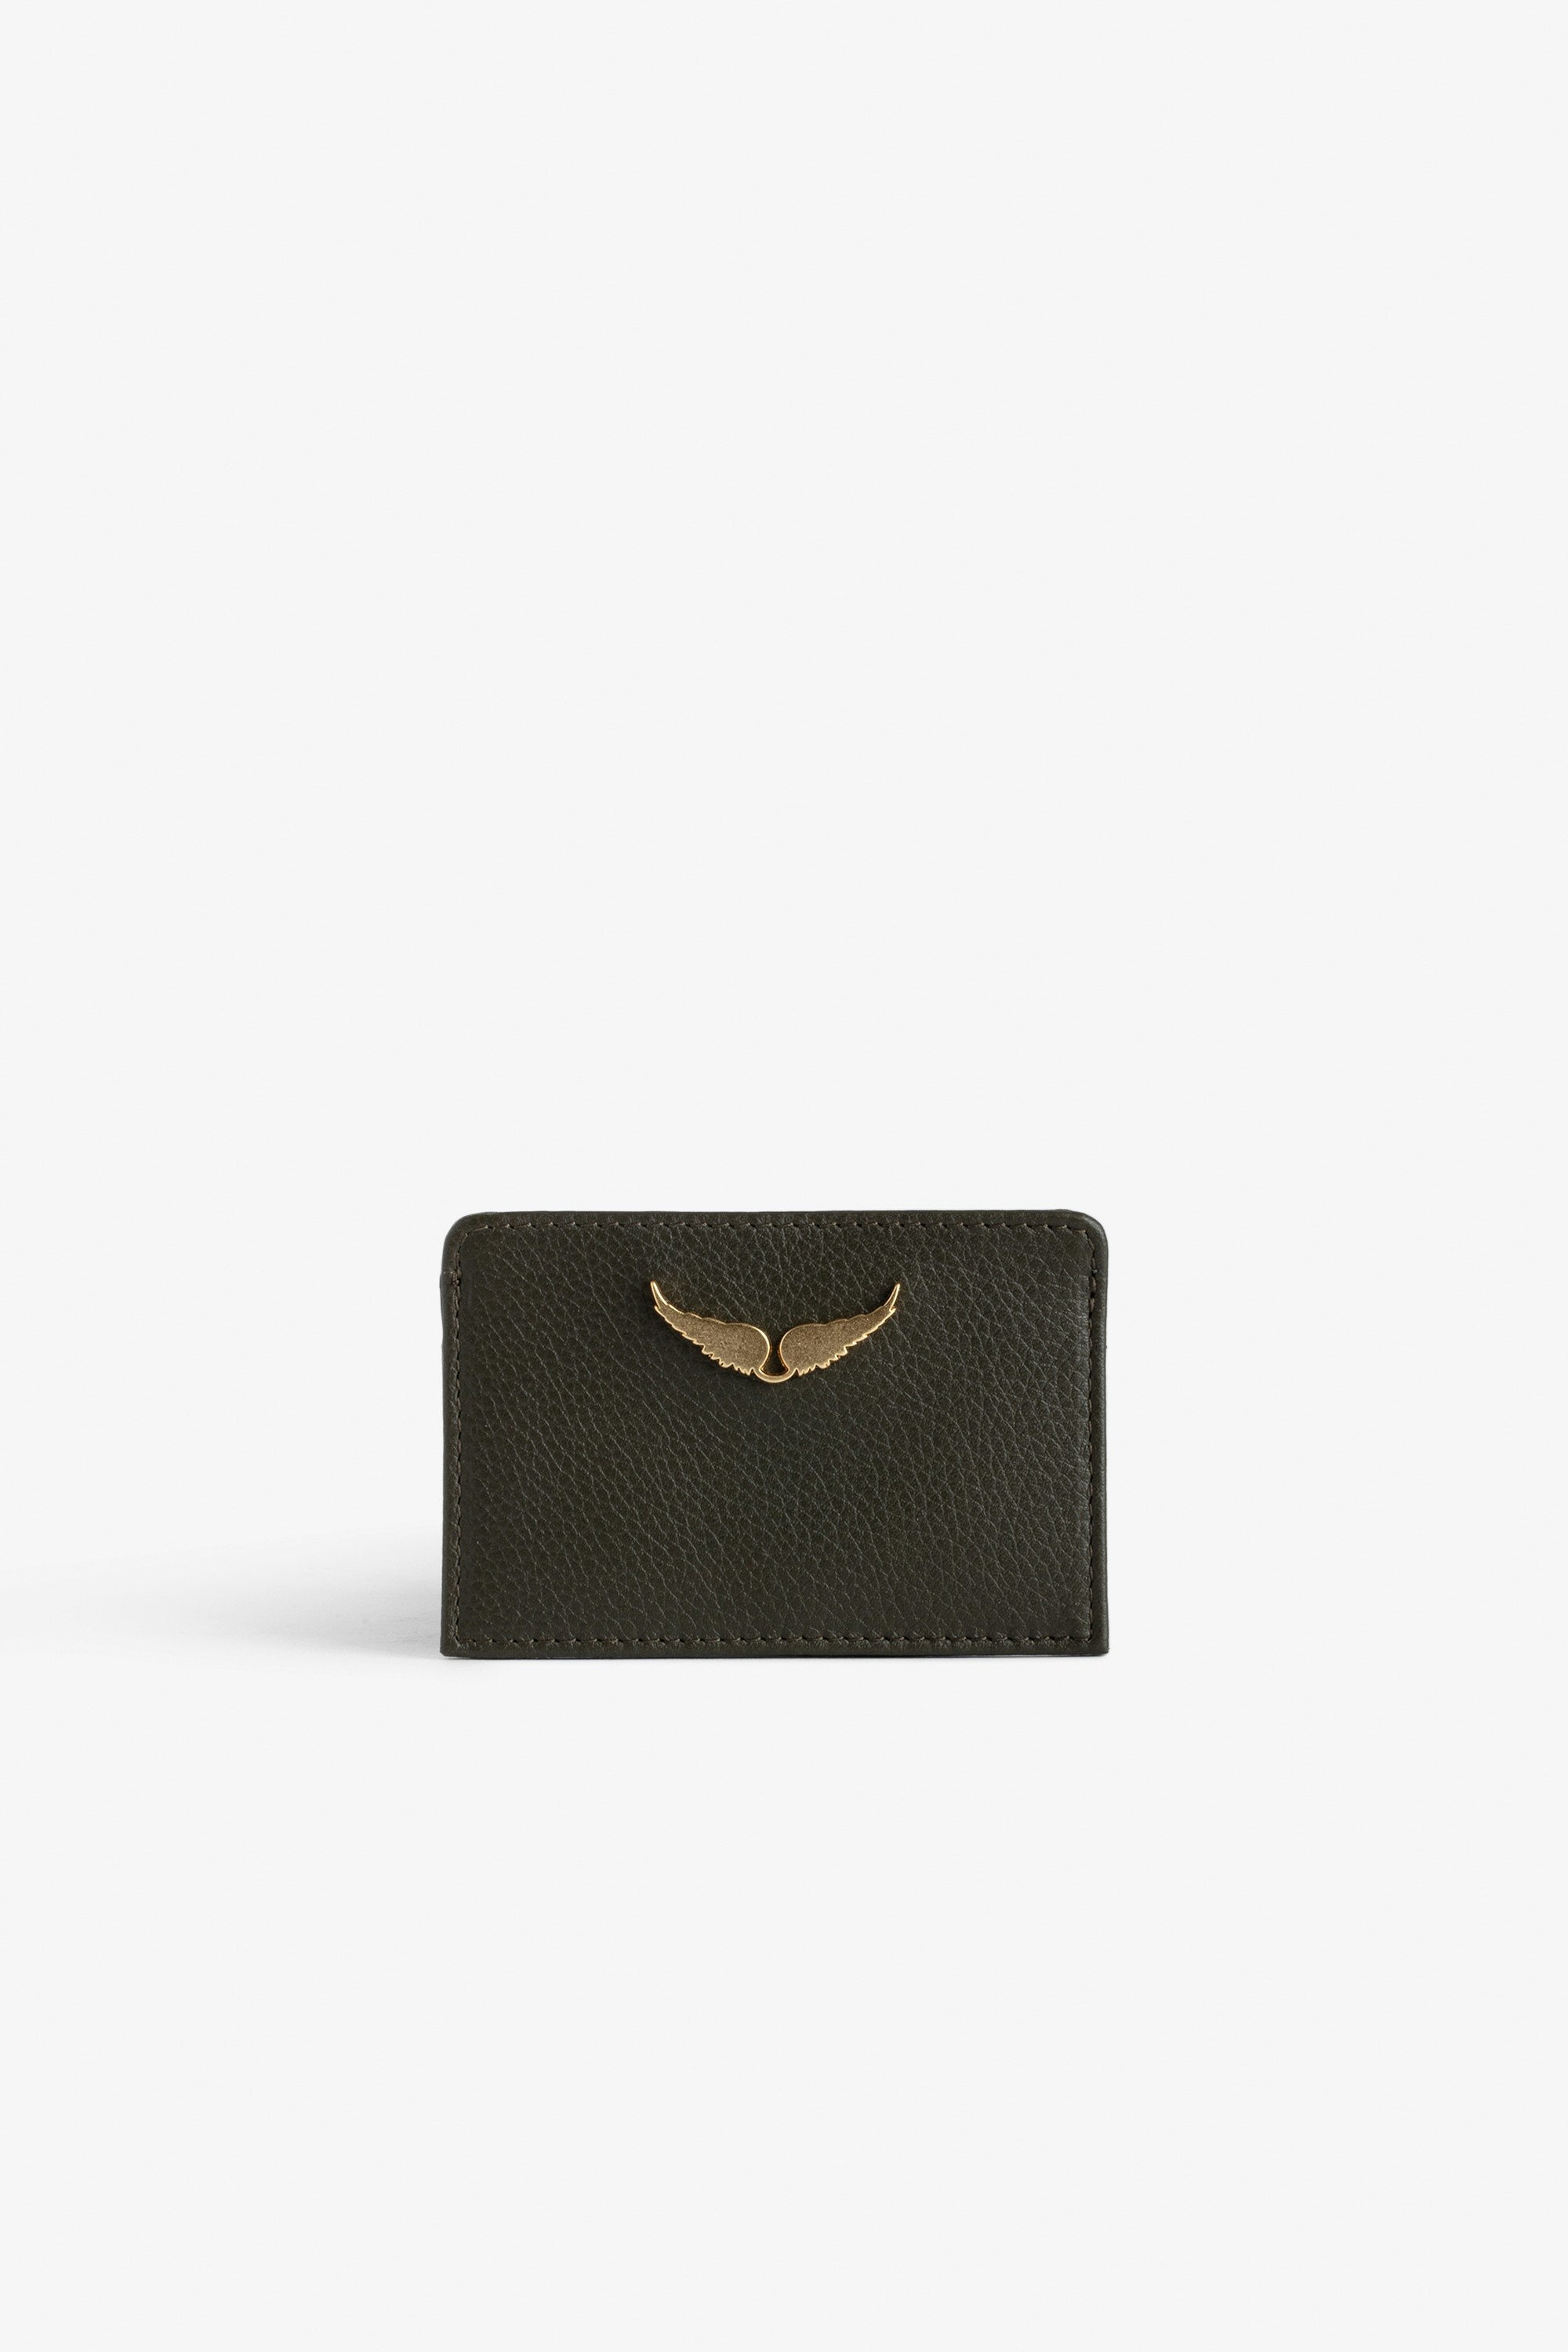 ZV Pass Card Holder - Women’s khaki grained leather card holder with gold-tone wings charm.